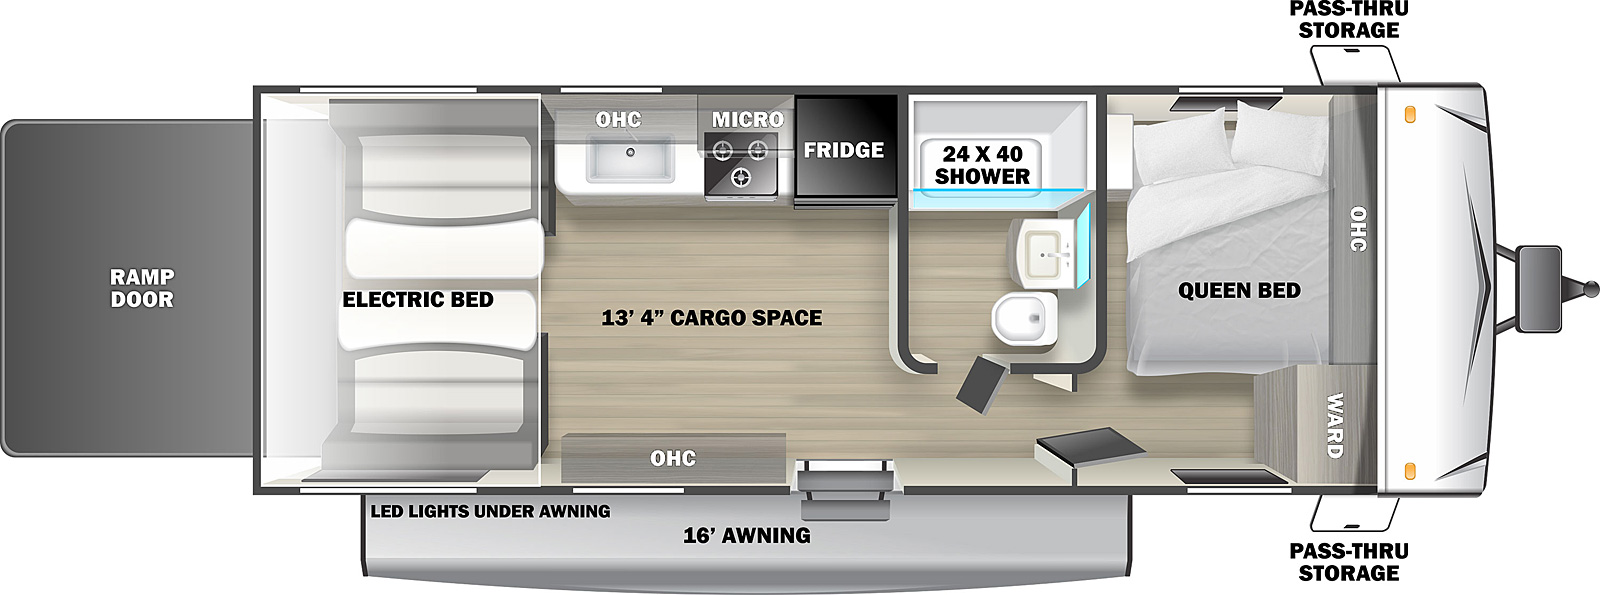 The Stealth FQ2113 is a toy hauler trailer with one entry door, a rear ramp door, front pass-through storage, and awning on the exterior. Inside layout front to back: front bedroom with side facing queen bed, cabinets mounted above, a night stand next at the head of the bed, and a wardrobe cabinet at the foot of the bed; off-door side aisle bathroom with shower, sink, and commode; off-door side kitchen includes a refrigerator, stovetop with oven, and sink, with cabinets and a microwave oven mounted overhead; door side overhead cabinets and entry; rear flip sofa with half dinette table and a pair of upholstered chairs with a small table in between with an electric bed above.